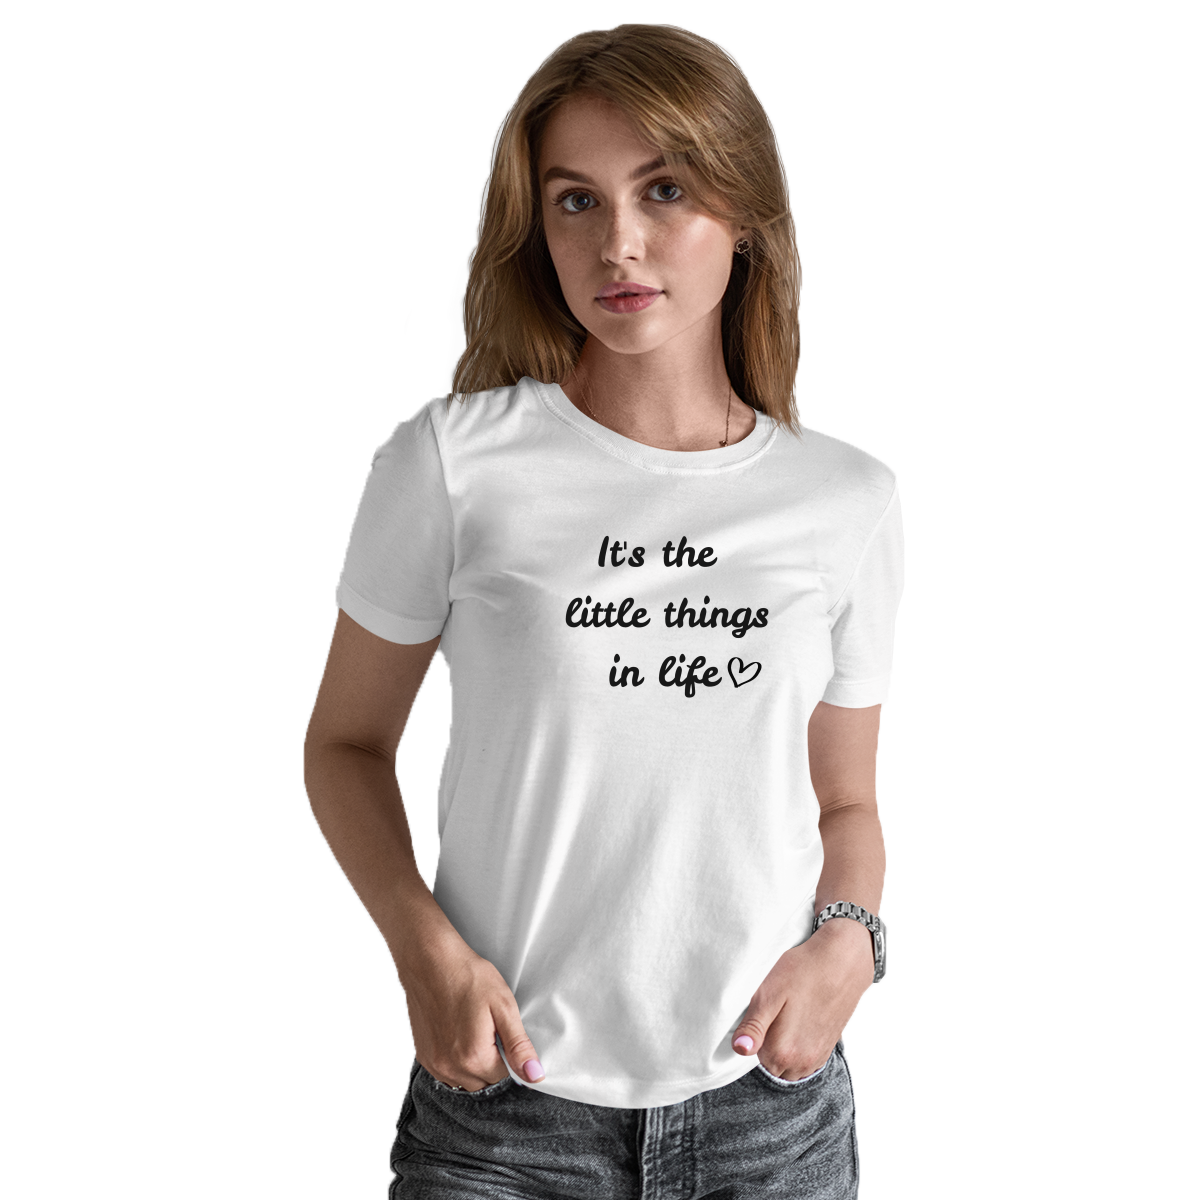 It's The Little Things In Life Women's T-shirt | White